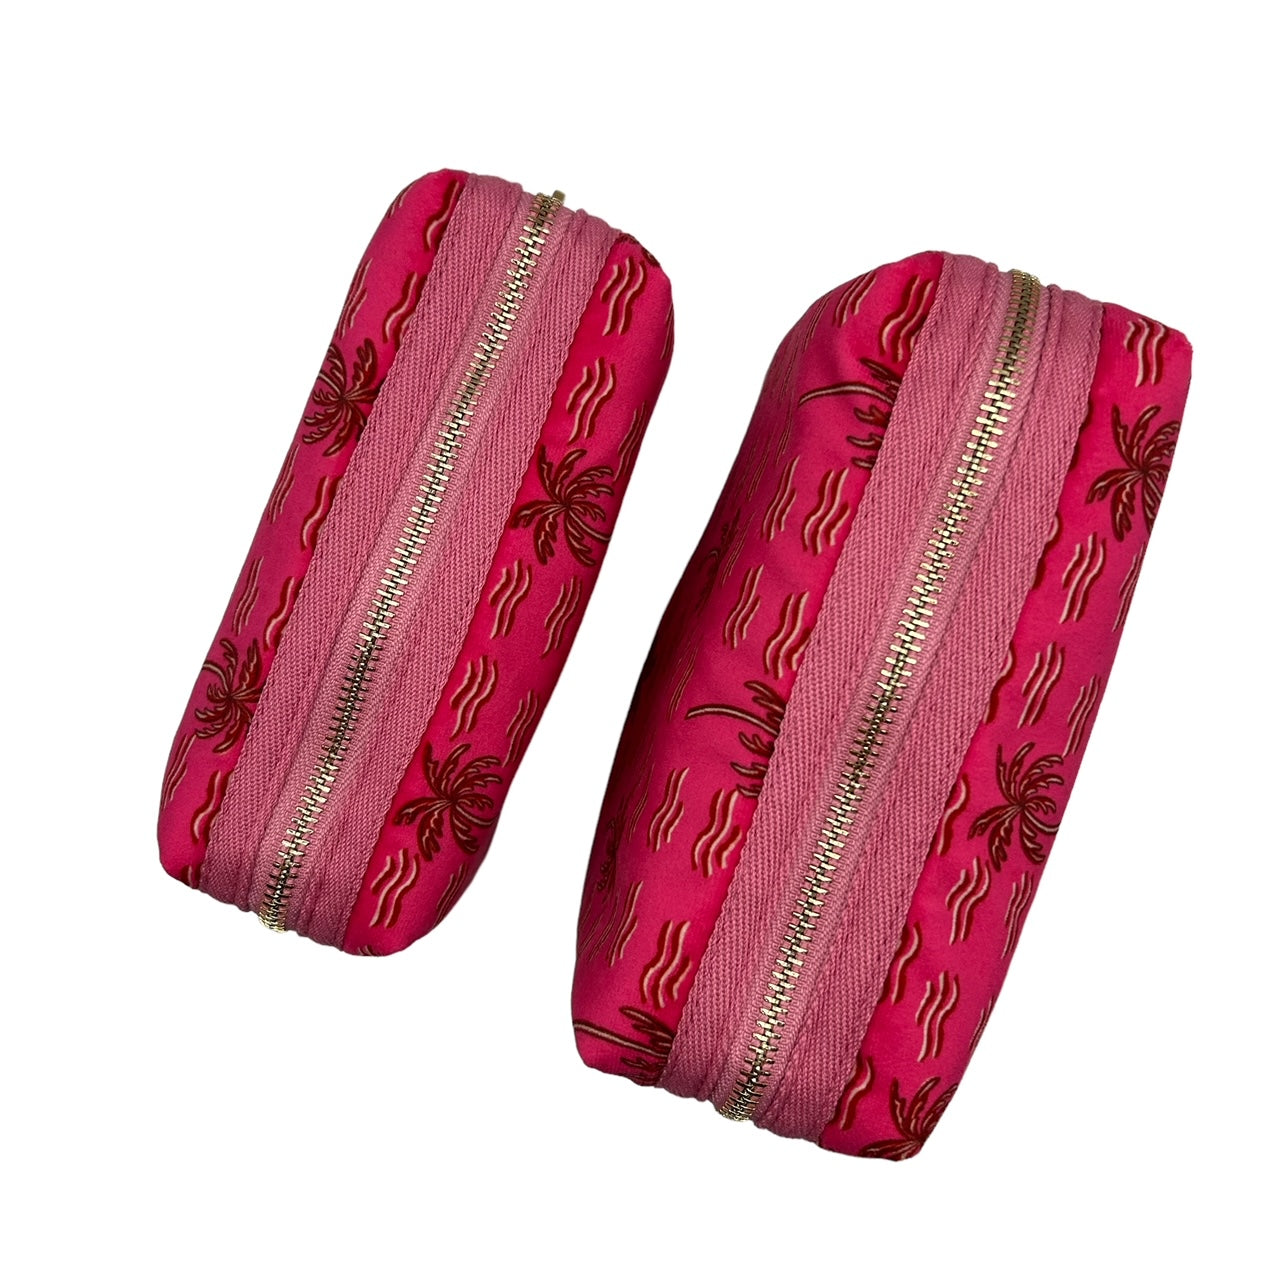 Pink palm large make-up bag & tiger brooch - recycled velvet, large and small